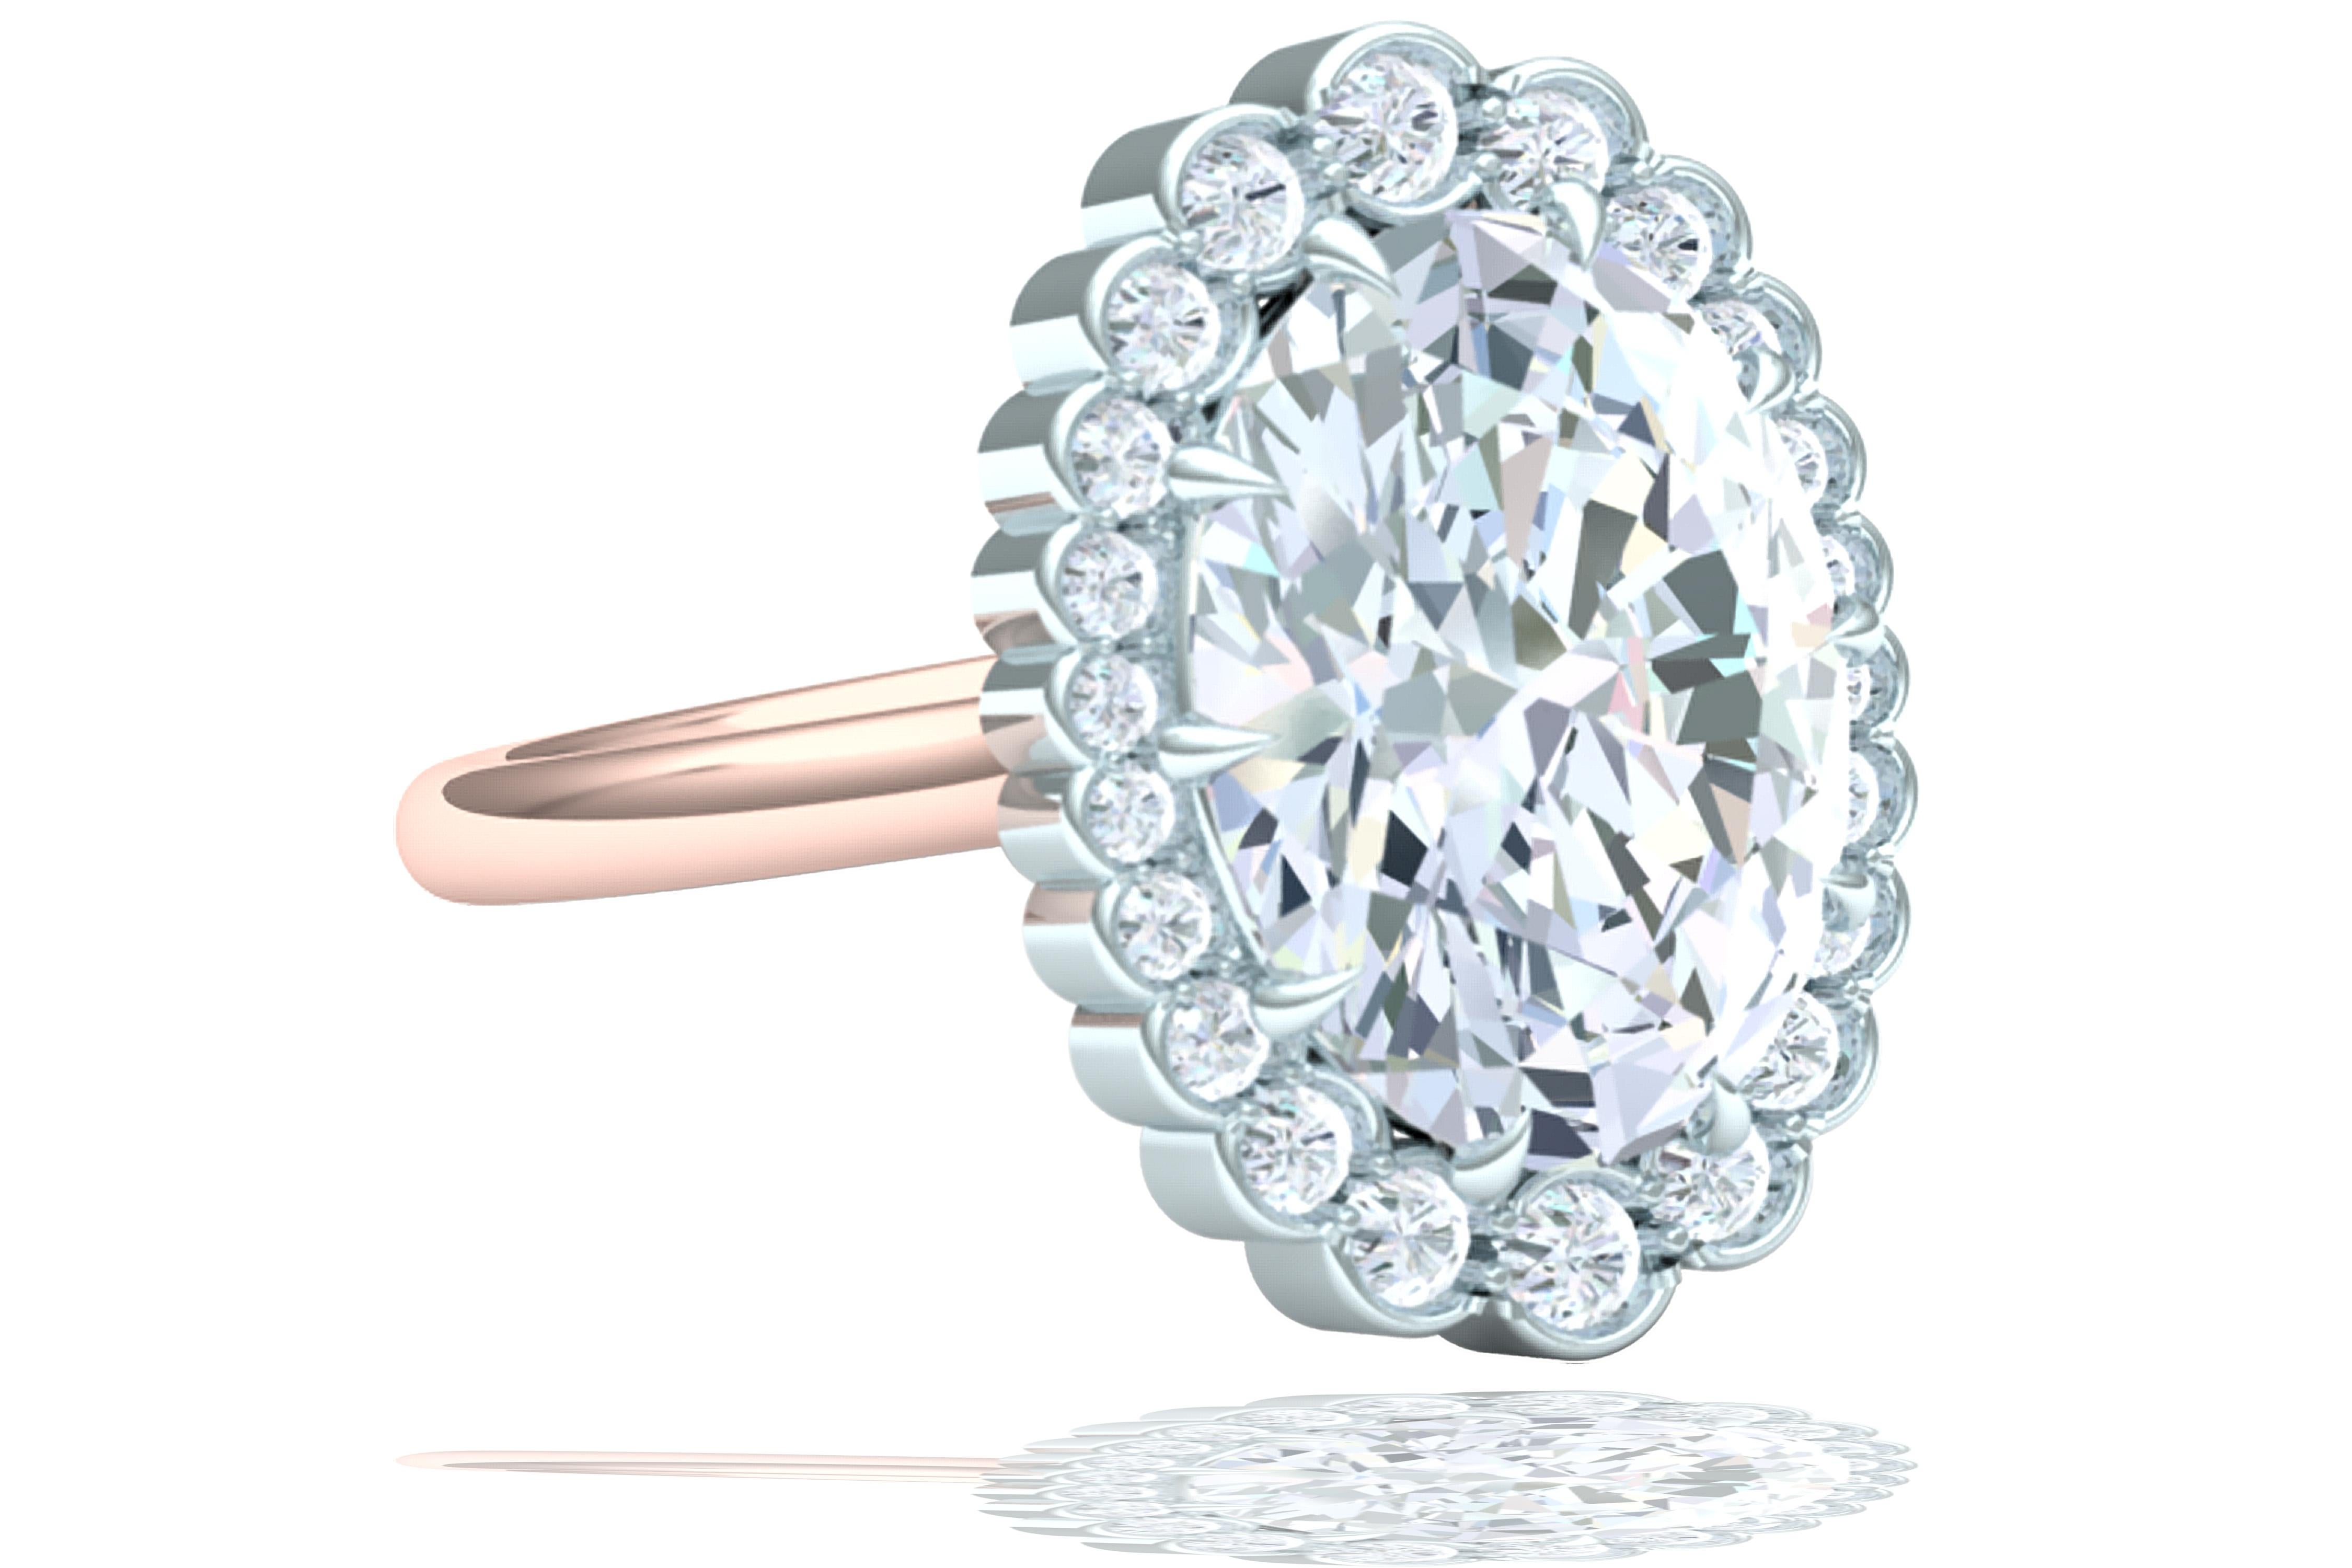 This classic and stunning diamond ring consist of the following.  There's one oval brilliant GIA certified diamond that is mounted in the center and has a color and clarity of G-SI2.  The center diamond weighs just over 1.5 carats and is surrounded